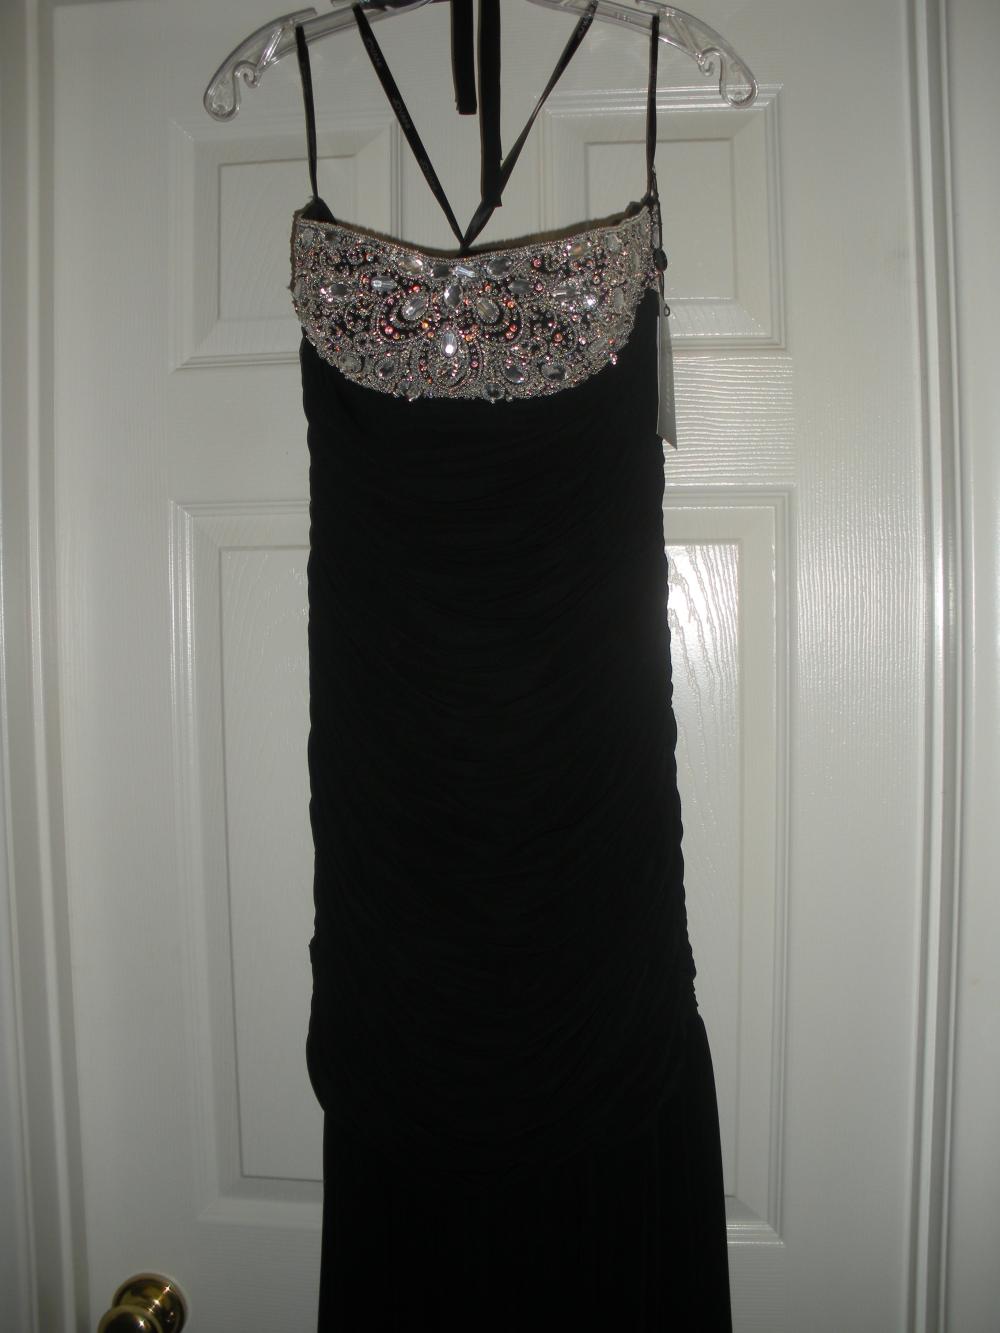 SIZE 2 JOVANI GOWN ITEM # 14332 NEVER BEEN WORN $300 OBO